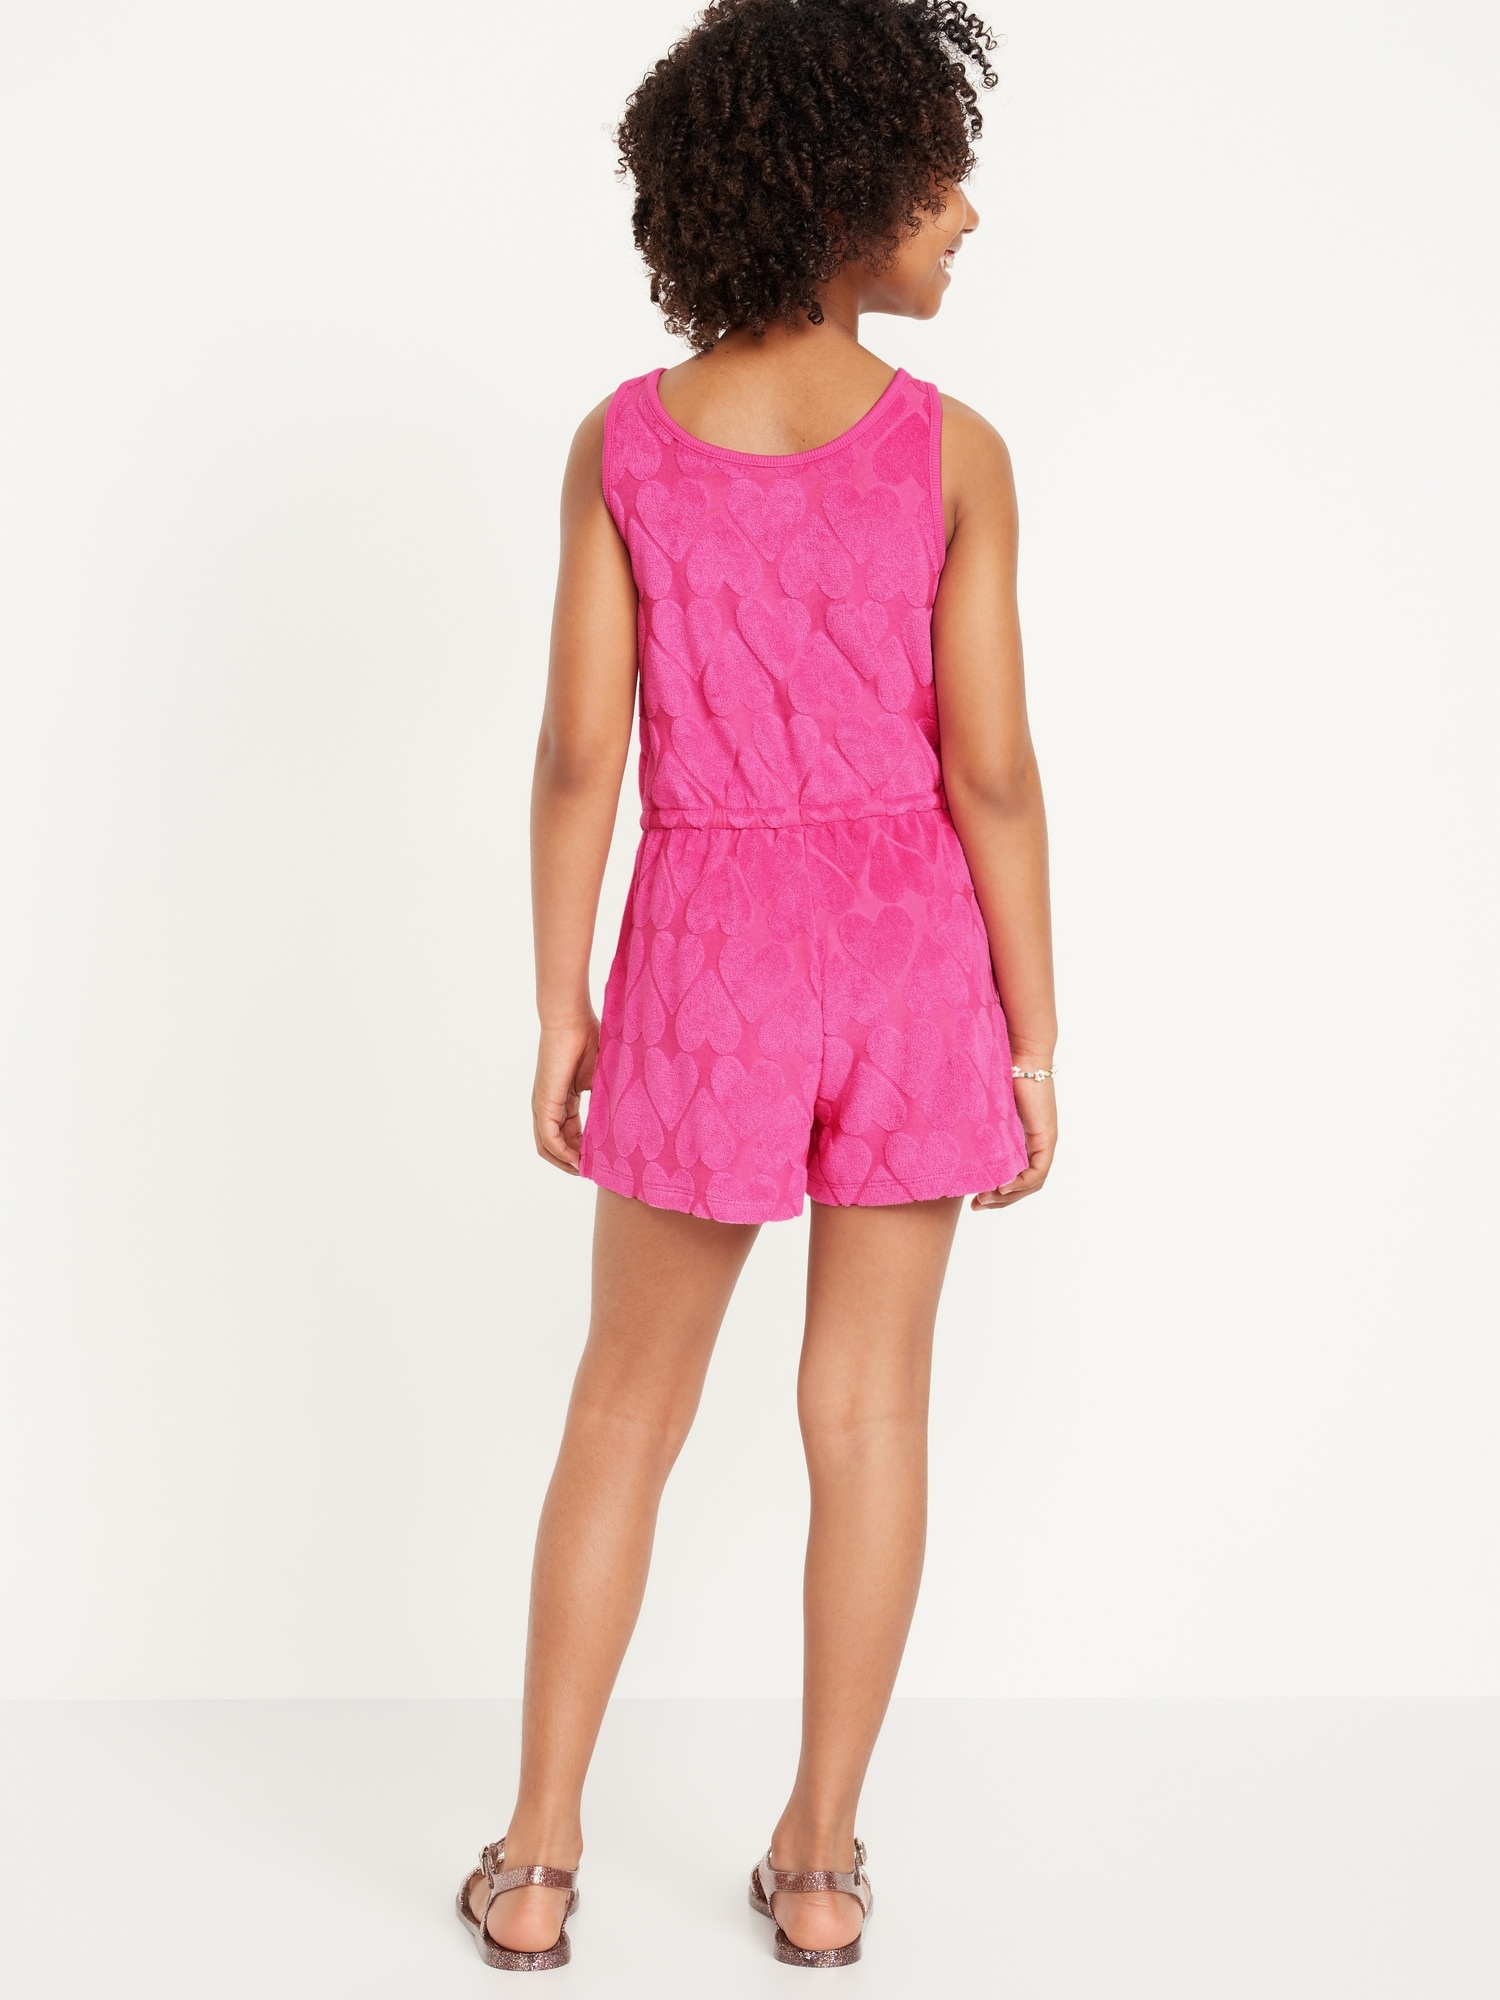 Sleeveless Terry Cinched-Waist Romper for Girls